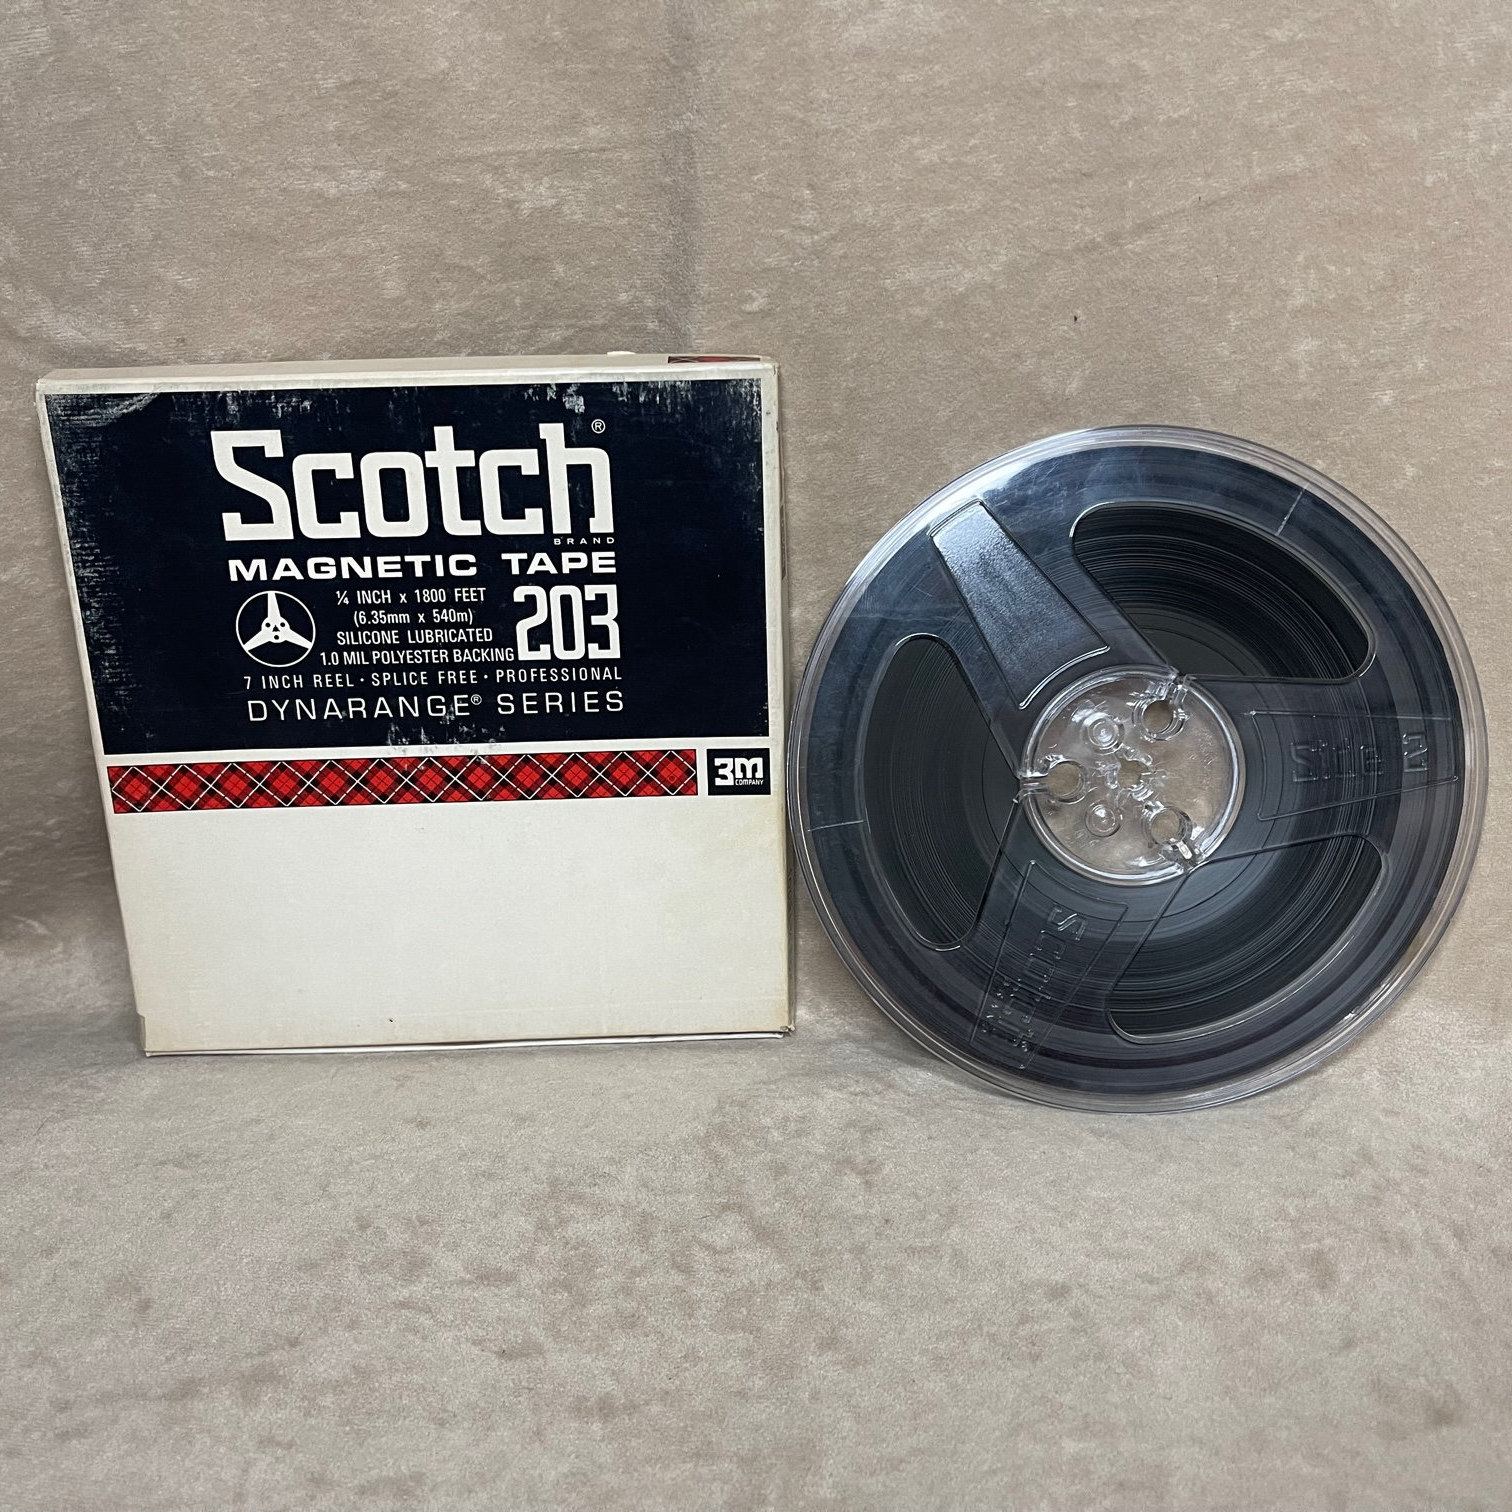 Vintage 1960s 3M Scotch 203 Magnetic Recording Tape 7 Inch Reel to